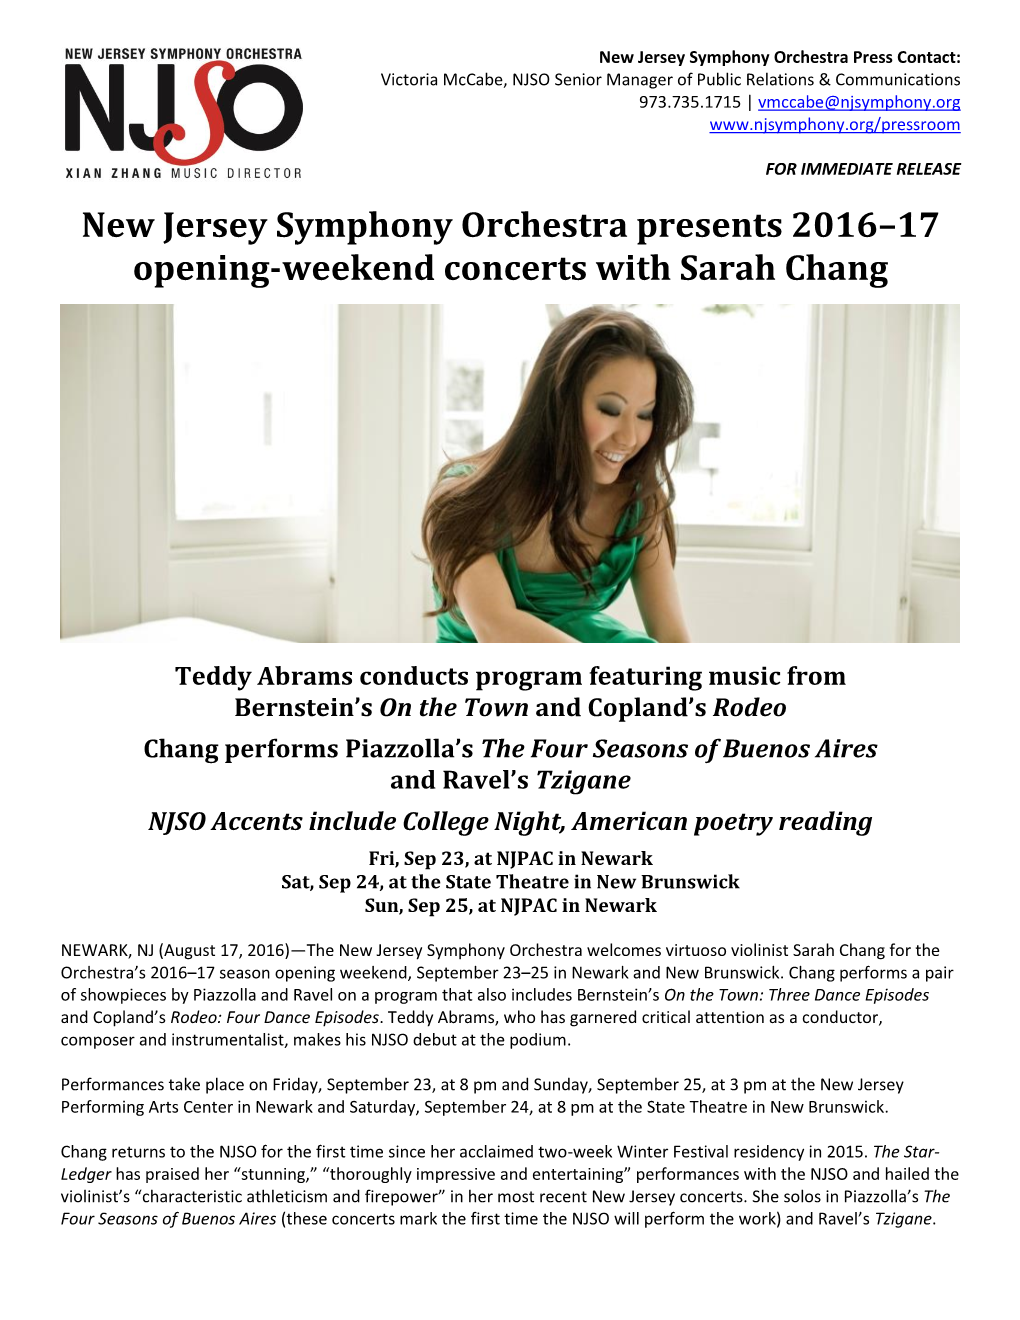 New Jersey Symphony Orchestra Presents 2016–17 Opening-Weekend Concerts with Sarah Chang